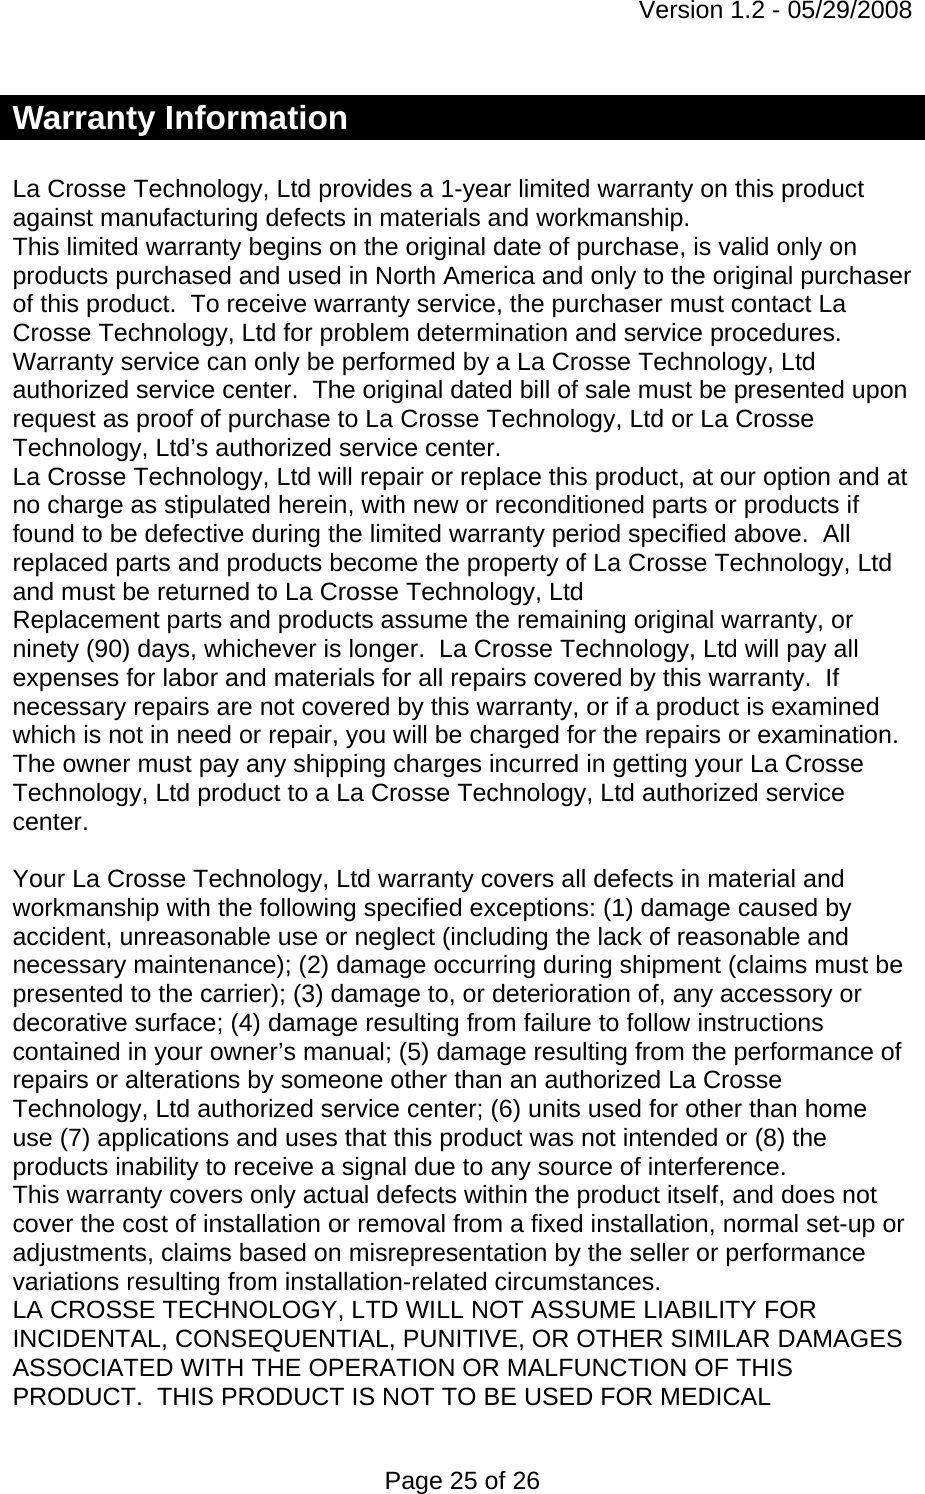 Version 1.2 - 05/29/2008 Page 25 of 26 Warranty Information  La Crosse Technology, Ltd provides a 1-year limited warranty on this product against manufacturing defects in materials and workmanship. This limited warranty begins on the original date of purchase, is valid only on products purchased and used in North America and only to the original purchaser of this product.  To receive warranty service, the purchaser must contact La Crosse Technology, Ltd for problem determination and service procedures.  Warranty service can only be performed by a La Crosse Technology, Ltd authorized service center.  The original dated bill of sale must be presented upon request as proof of purchase to La Crosse Technology, Ltd or La Crosse Technology, Ltd’s authorized service center. La Crosse Technology, Ltd will repair or replace this product, at our option and at no charge as stipulated herein, with new or reconditioned parts or products if found to be defective during the limited warranty period specified above.  All replaced parts and products become the property of La Crosse Technology, Ltd and must be returned to La Crosse Technology, Ltd  Replacement parts and products assume the remaining original warranty, or ninety (90) days, whichever is longer.  La Crosse Technology, Ltd will pay all expenses for labor and materials for all repairs covered by this warranty.  If necessary repairs are not covered by this warranty, or if a product is examined which is not in need or repair, you will be charged for the repairs or examination.   The owner must pay any shipping charges incurred in getting your La Crosse Technology, Ltd product to a La Crosse Technology, Ltd authorized service center.   Your La Crosse Technology, Ltd warranty covers all defects in material and workmanship with the following specified exceptions: (1) damage caused by accident, unreasonable use or neglect (including the lack of reasonable and necessary maintenance); (2) damage occurring during shipment (claims must be presented to the carrier); (3) damage to, or deterioration of, any accessory or decorative surface; (4) damage resulting from failure to follow instructions contained in your owner’s manual; (5) damage resulting from the performance of repairs or alterations by someone other than an authorized La Crosse Technology, Ltd authorized service center; (6) units used for other than home use (7) applications and uses that this product was not intended or (8) the products inability to receive a signal due to any source of interference. This warranty covers only actual defects within the product itself, and does not cover the cost of installation or removal from a fixed installation, normal set-up or adjustments, claims based on misrepresentation by the seller or performance variations resulting from installation-related circumstances. LA CROSSE TECHNOLOGY, LTD WILL NOT ASSUME LIABILITY FOR INCIDENTAL, CONSEQUENTIAL, PUNITIVE, OR OTHER SIMILAR DAMAGES ASSOCIATED WITH THE OPERATION OR MALFUNCTION OF THIS PRODUCT.  THIS PRODUCT IS NOT TO BE USED FOR MEDICAL 